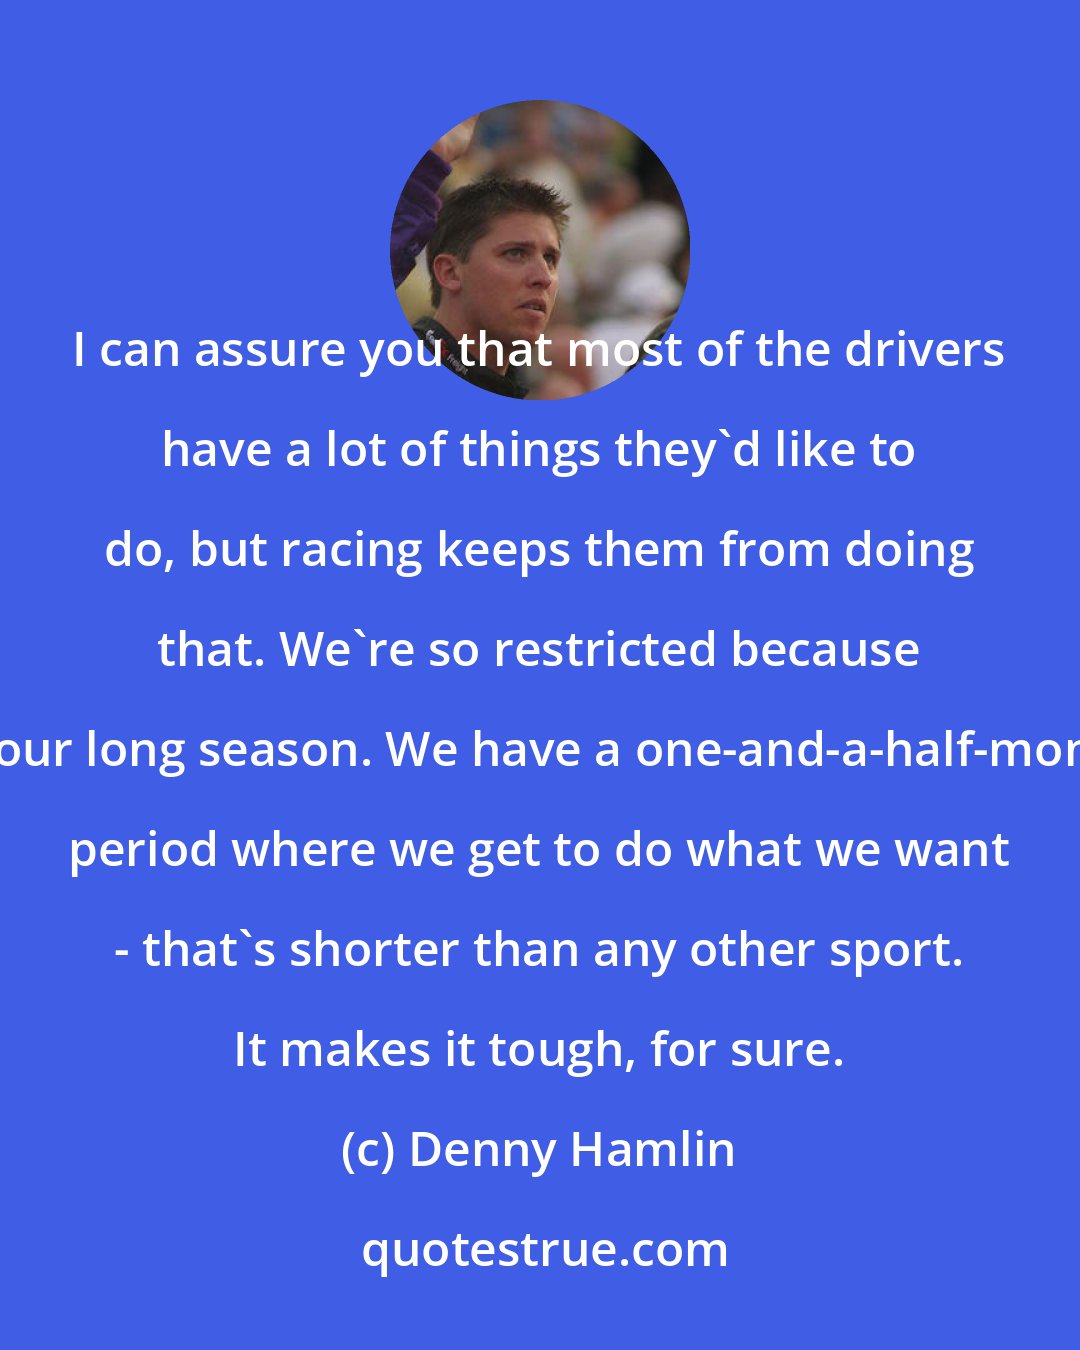 Denny Hamlin: I can assure you that most of the drivers have a lot of things they'd like to do, but racing keeps them from doing that. We're so restricted because of our long season. We have a one-and-a-half-month period where we get to do what we want - that's shorter than any other sport. It makes it tough, for sure.